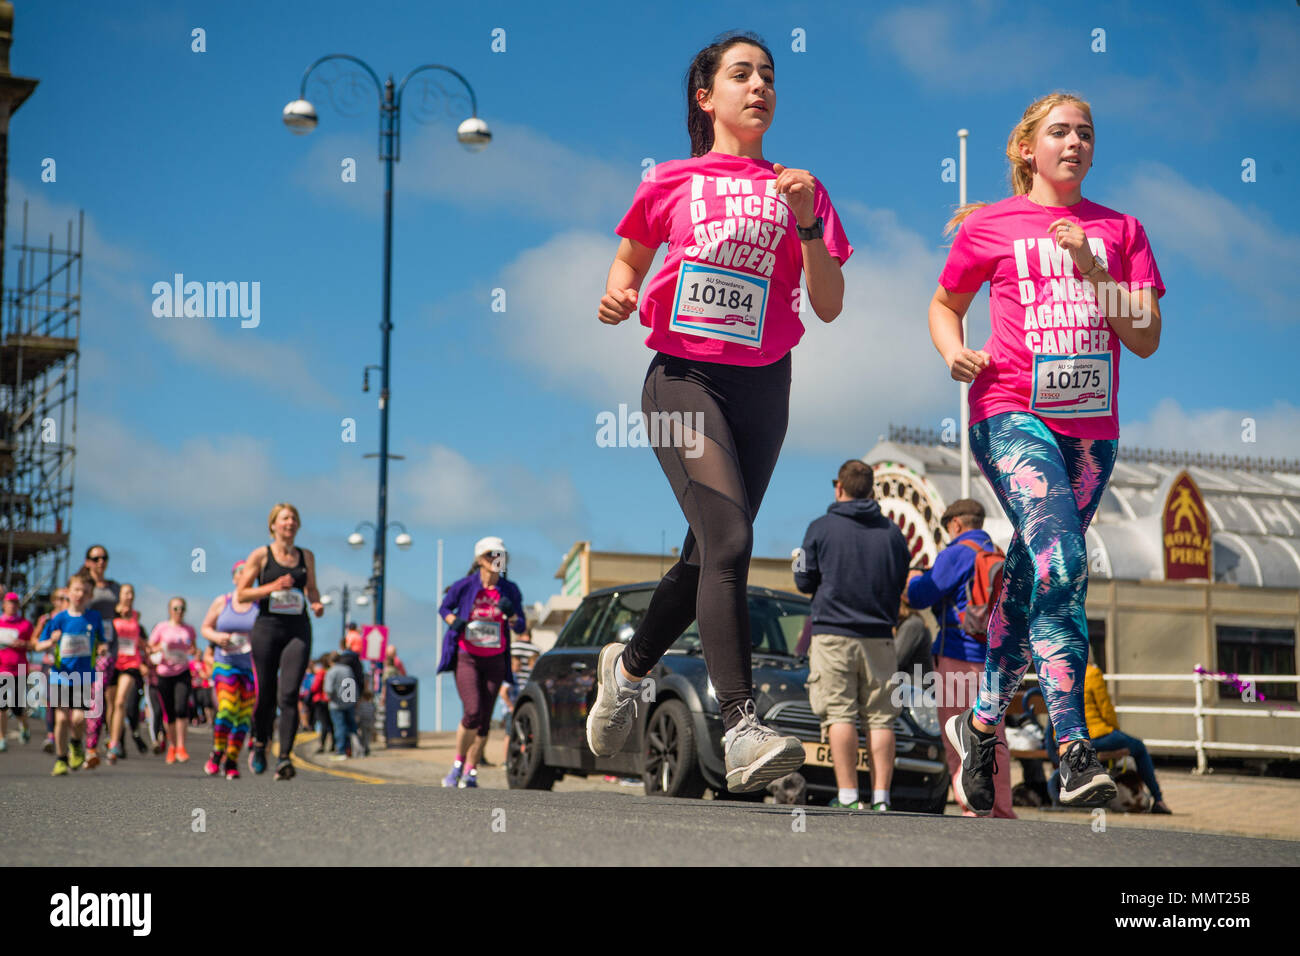 Aberystwyth Wales UK, Sunday 13 May 20918 UK Weather: Over a thousand women and girls, all dressed in shades of pink, with some in fancy dress too, took part in the annual Cancer Research fund-raising ‘Race for Life’ over 5km and 10km courses along Aberystwyth’s promenade, on a bright and sunny May Sunday morning. It is anticipated that once all the sponsorship money has been received, this single event will have raised over £50,000 for cancer research in the UK  photo © Keith Morris / Alamy Live News Stock Photo